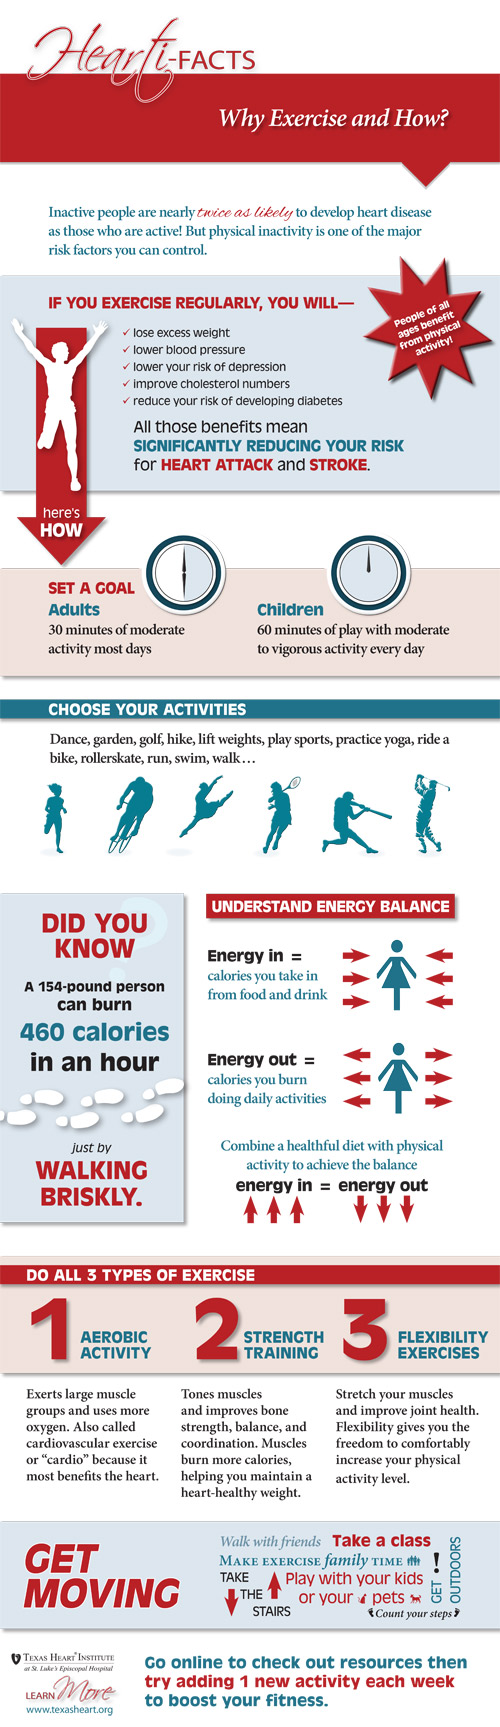 Exercise can help your body in many ways.